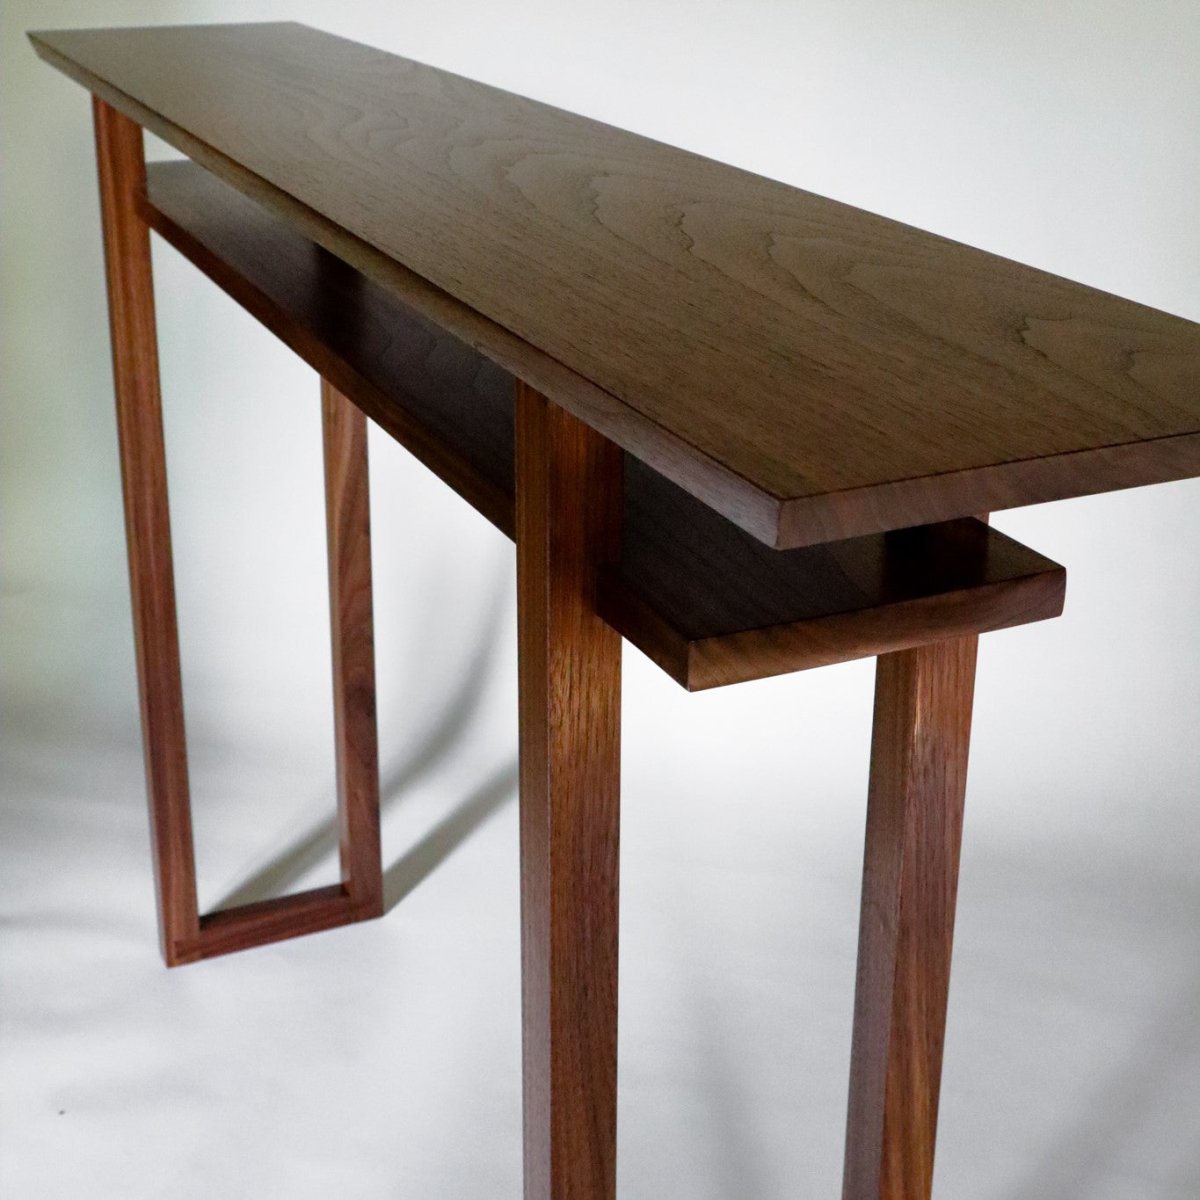 a modern walnut console table by Mokuzai Furniture that is the perfect modern console table for your hall table or entry table.